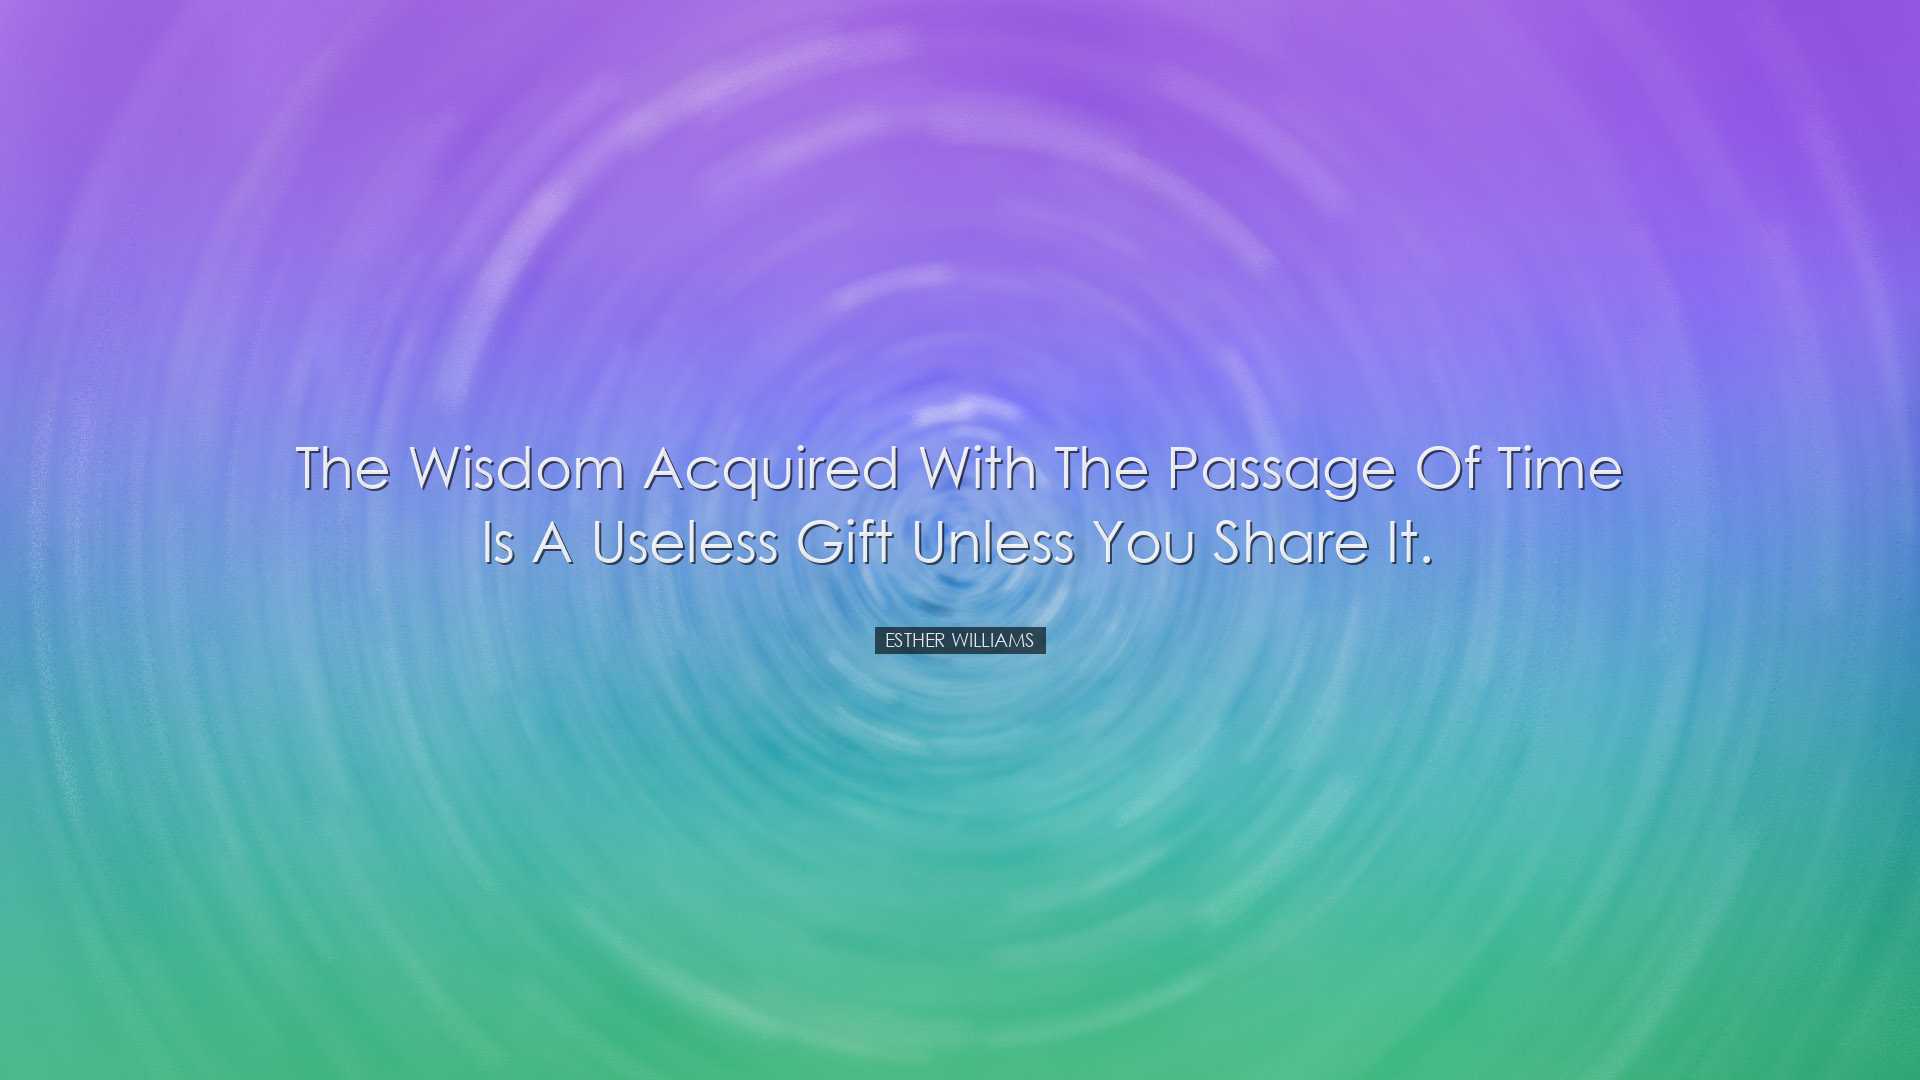 The wisdom acquired with the passage of time is a useless gift unl